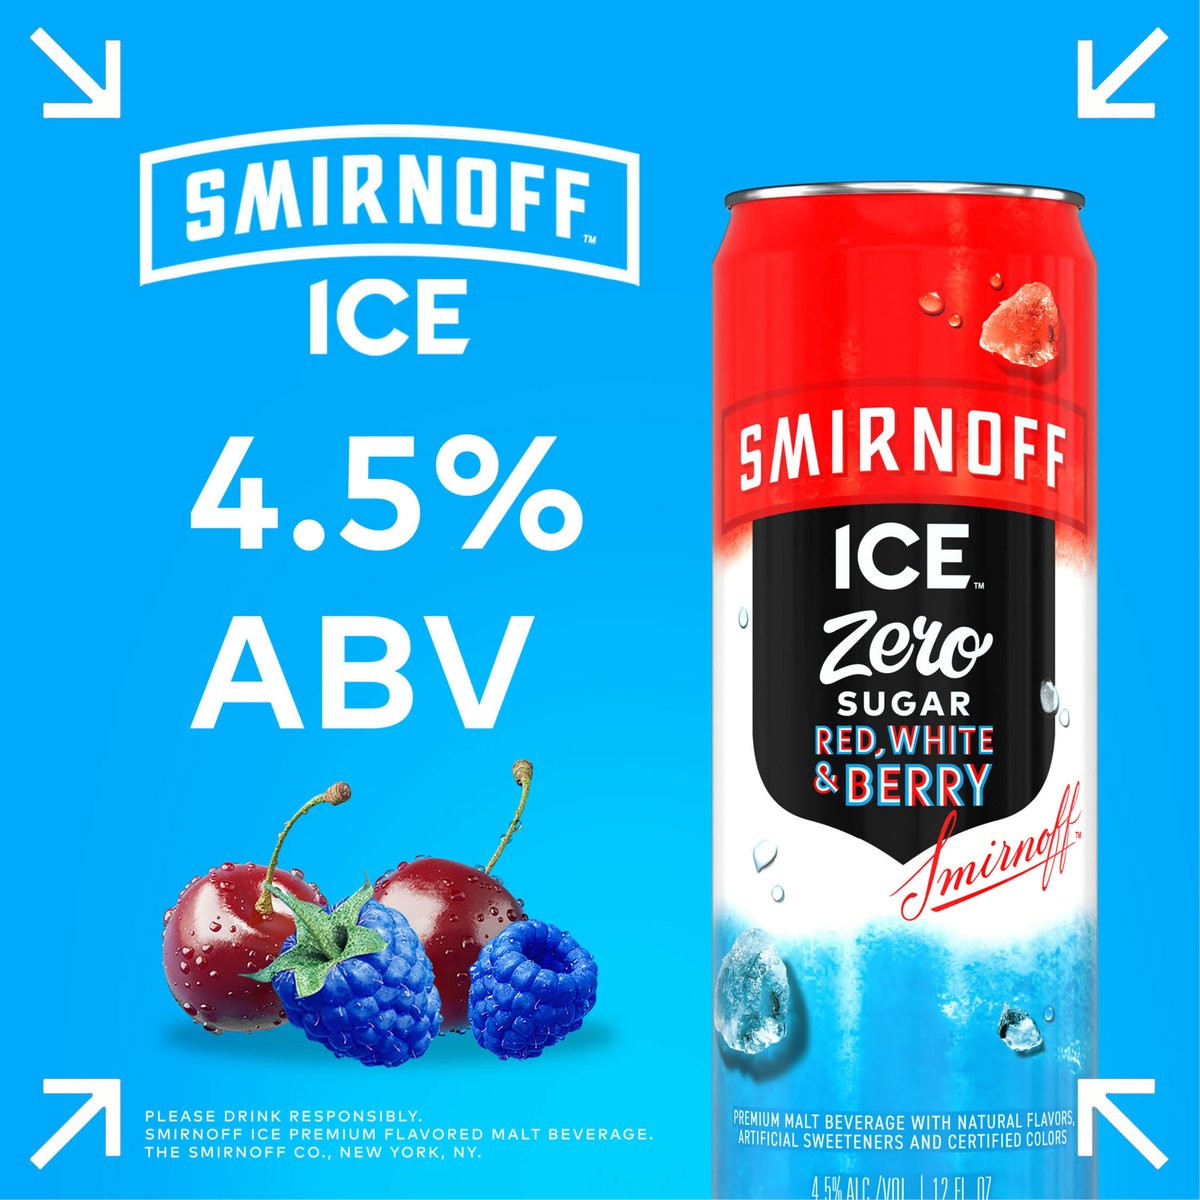 Meet the drink you'll want to stock your fridge with all summer... Smirnoff Ice Zero Sugar Red, White & Berry.